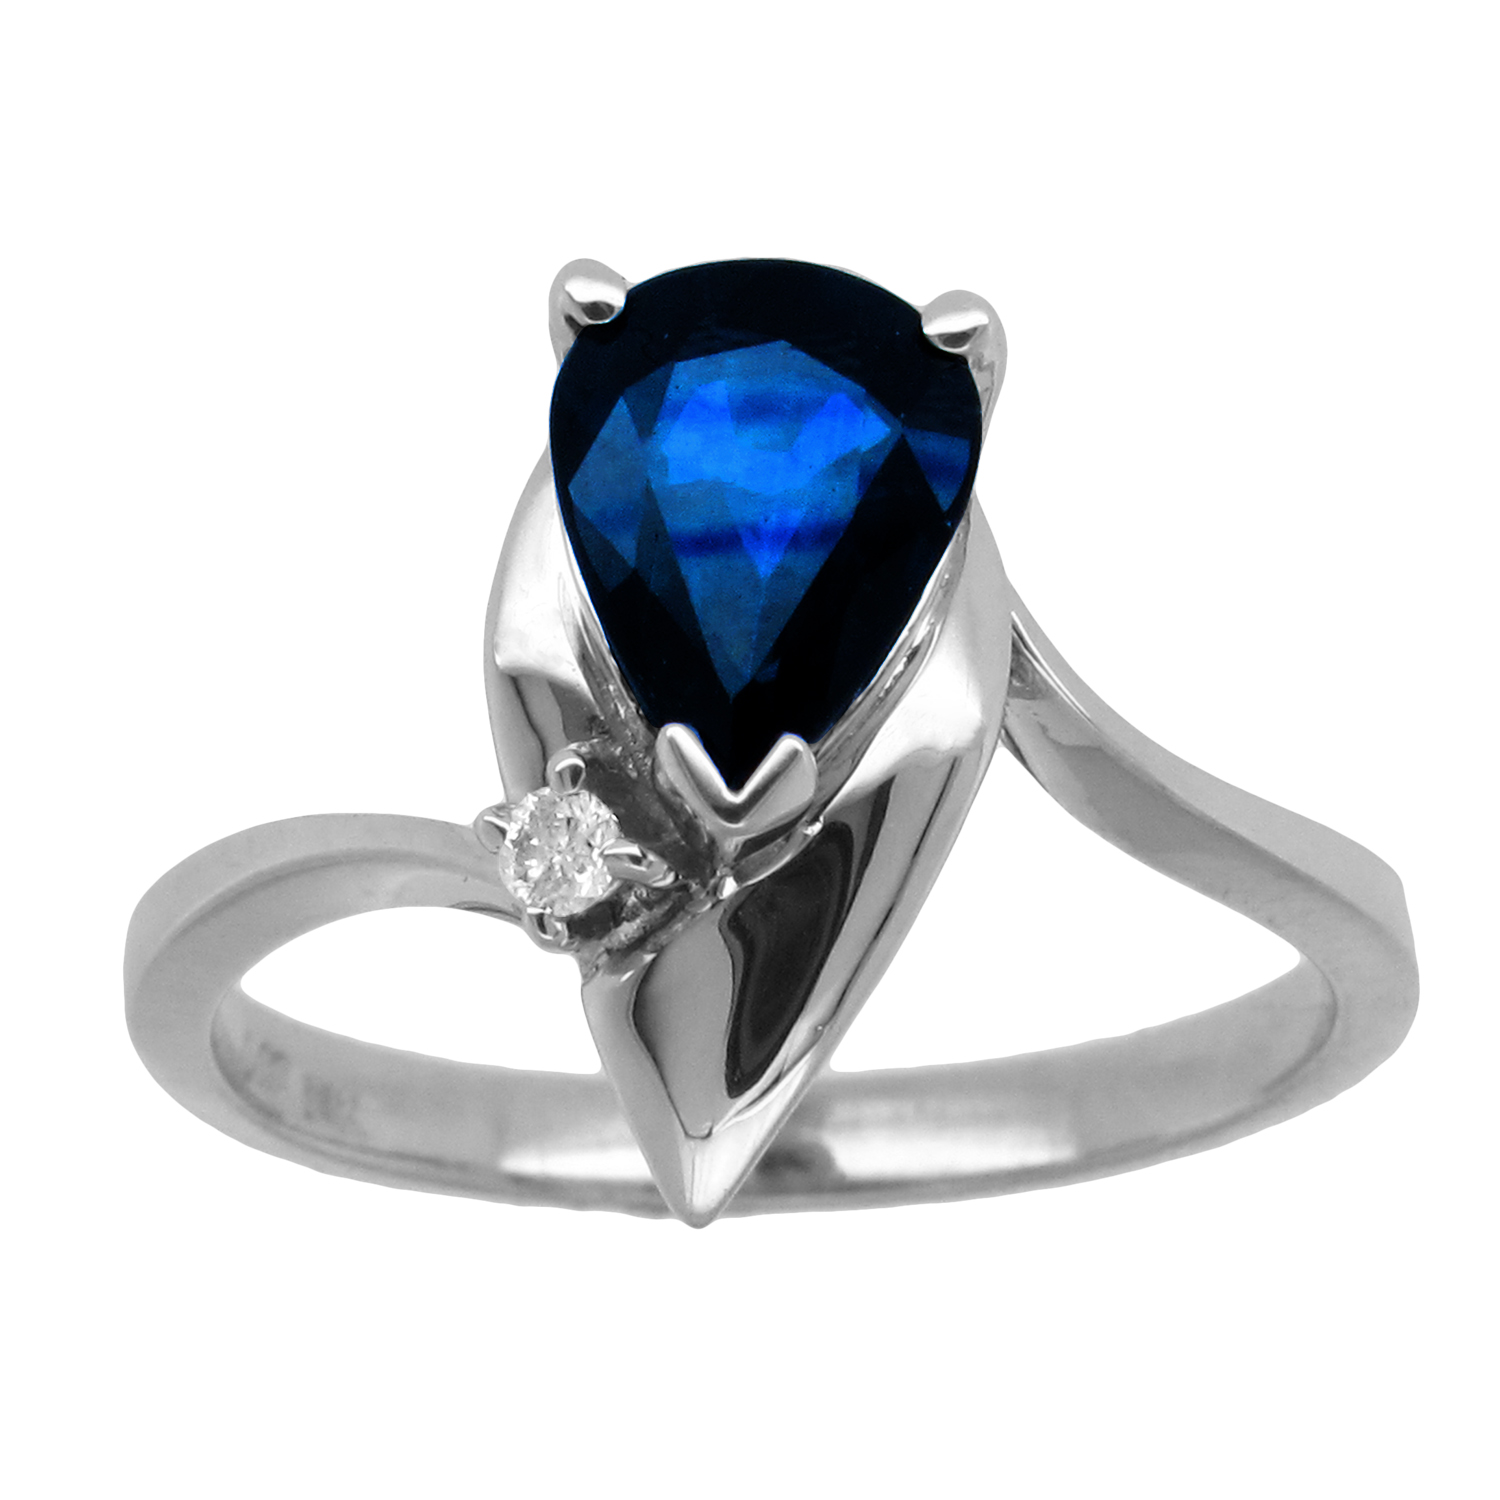 1.30cttw Pear Shaped Sapphire and Diamond Fashion Ring set in 14k Gold